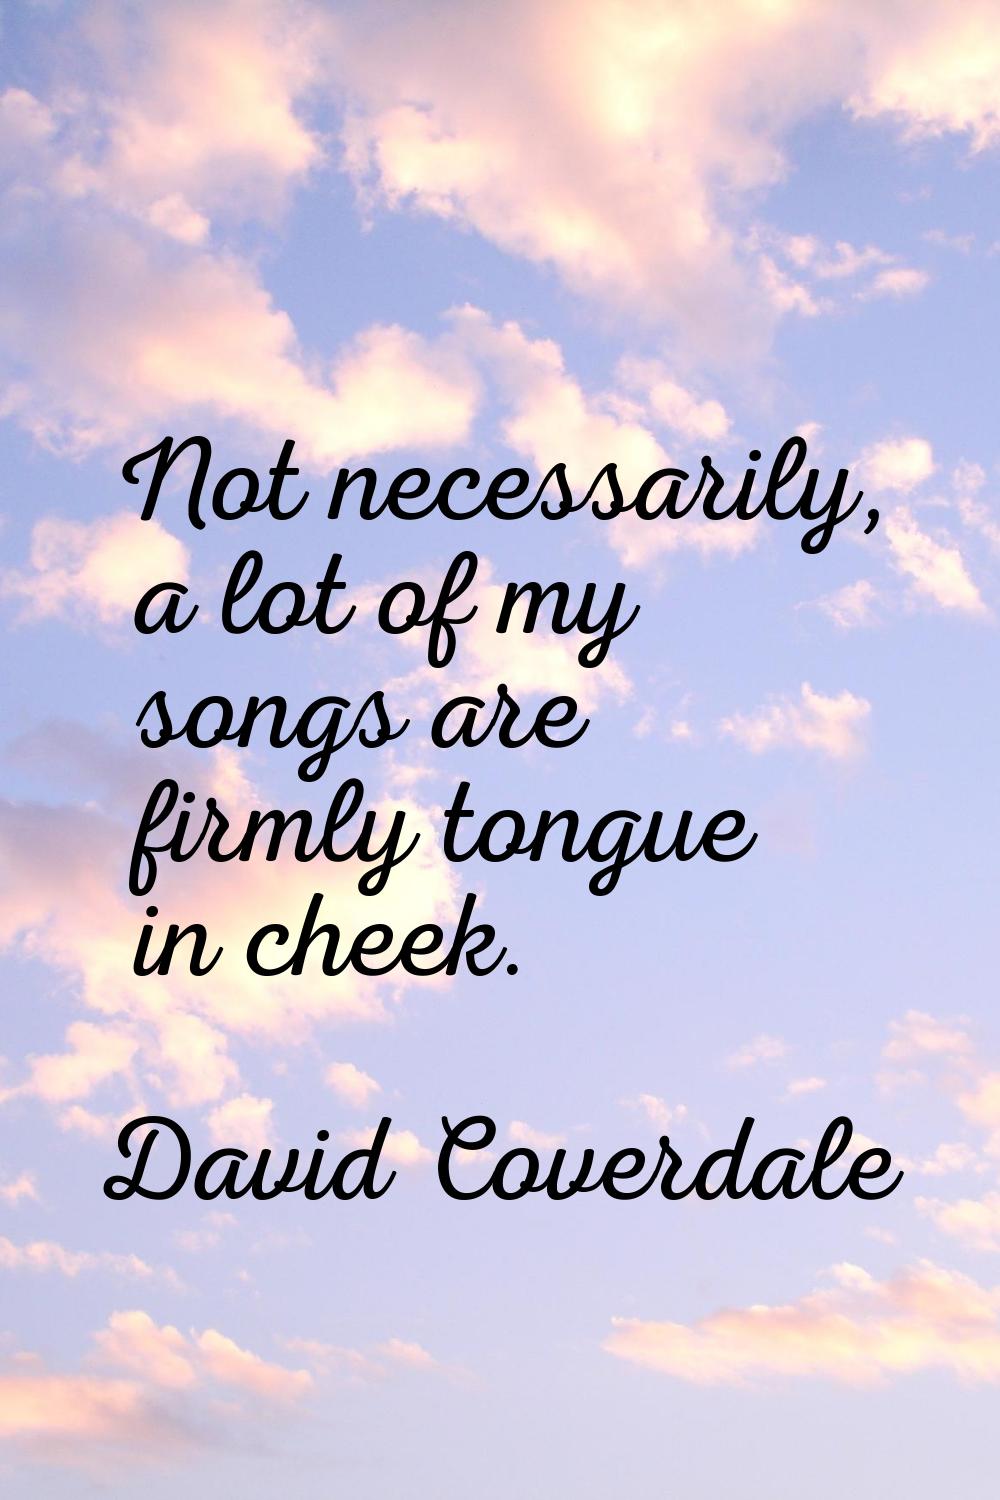 Not necessarily, a lot of my songs are firmly tongue in cheek.